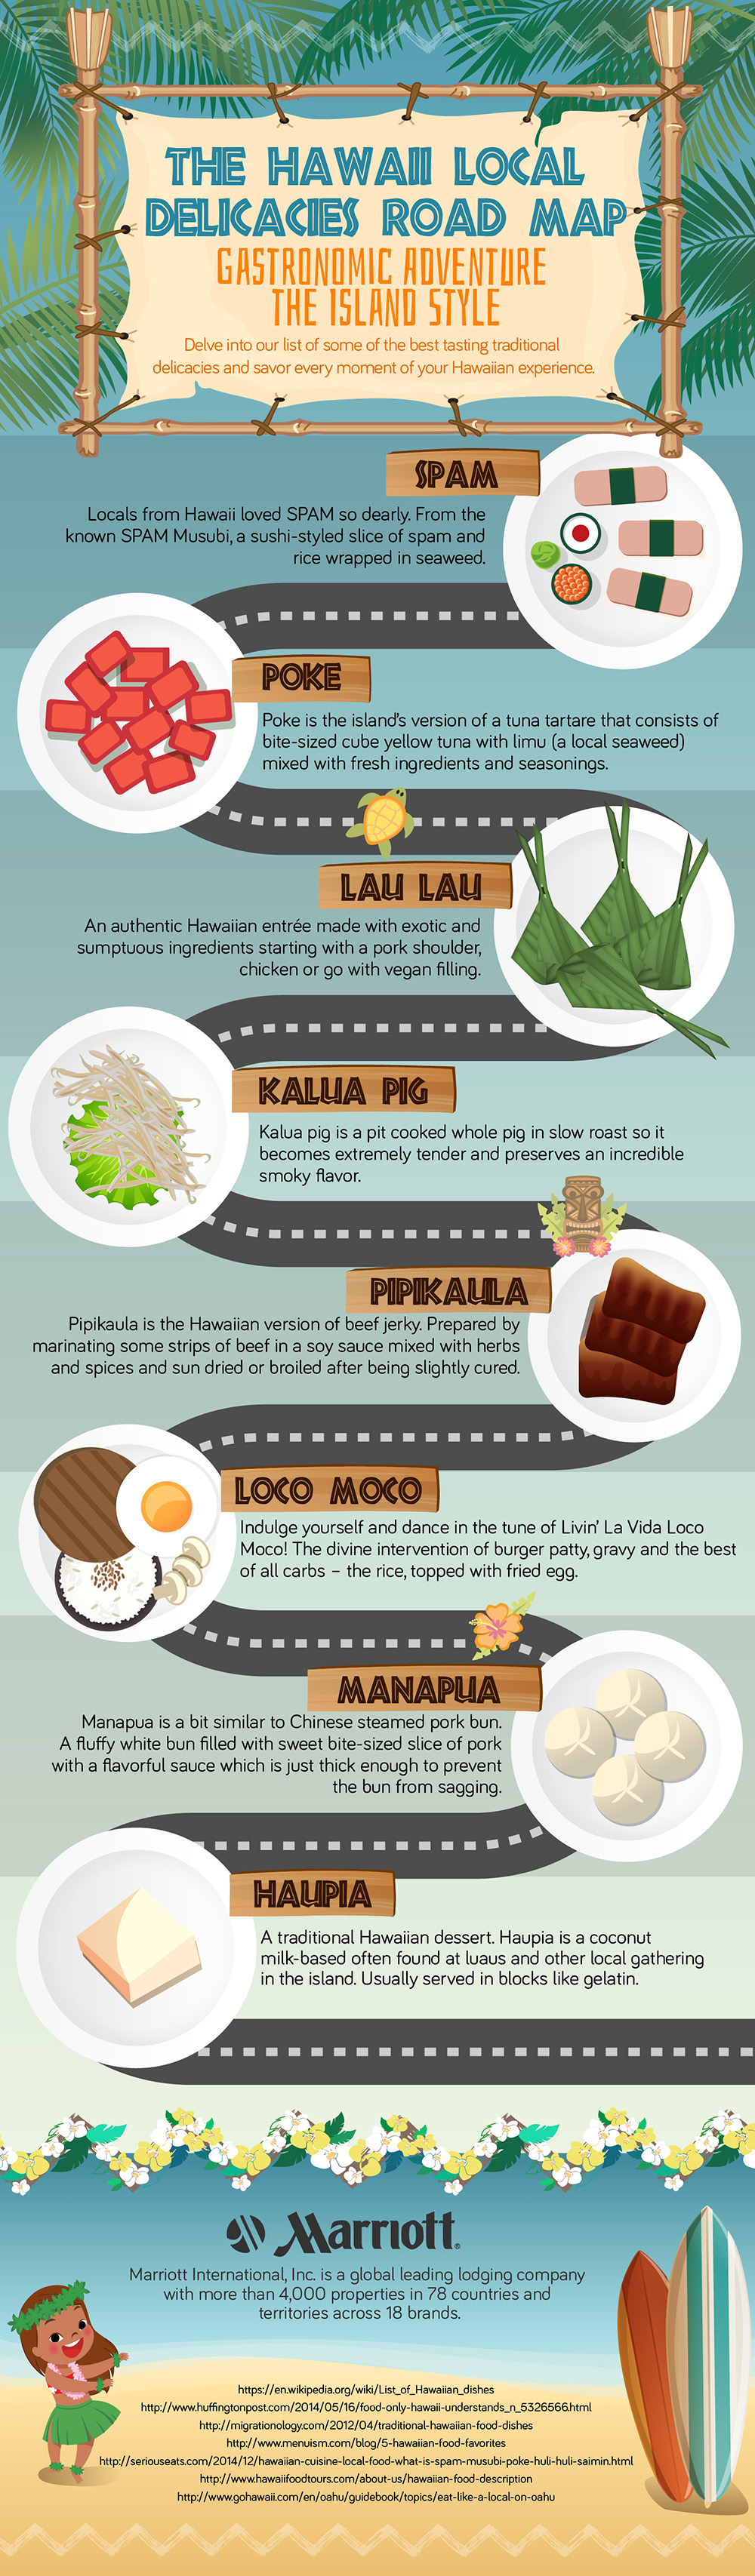 Top Hawaiian Local Delicacies You Must Try | Visual.ly